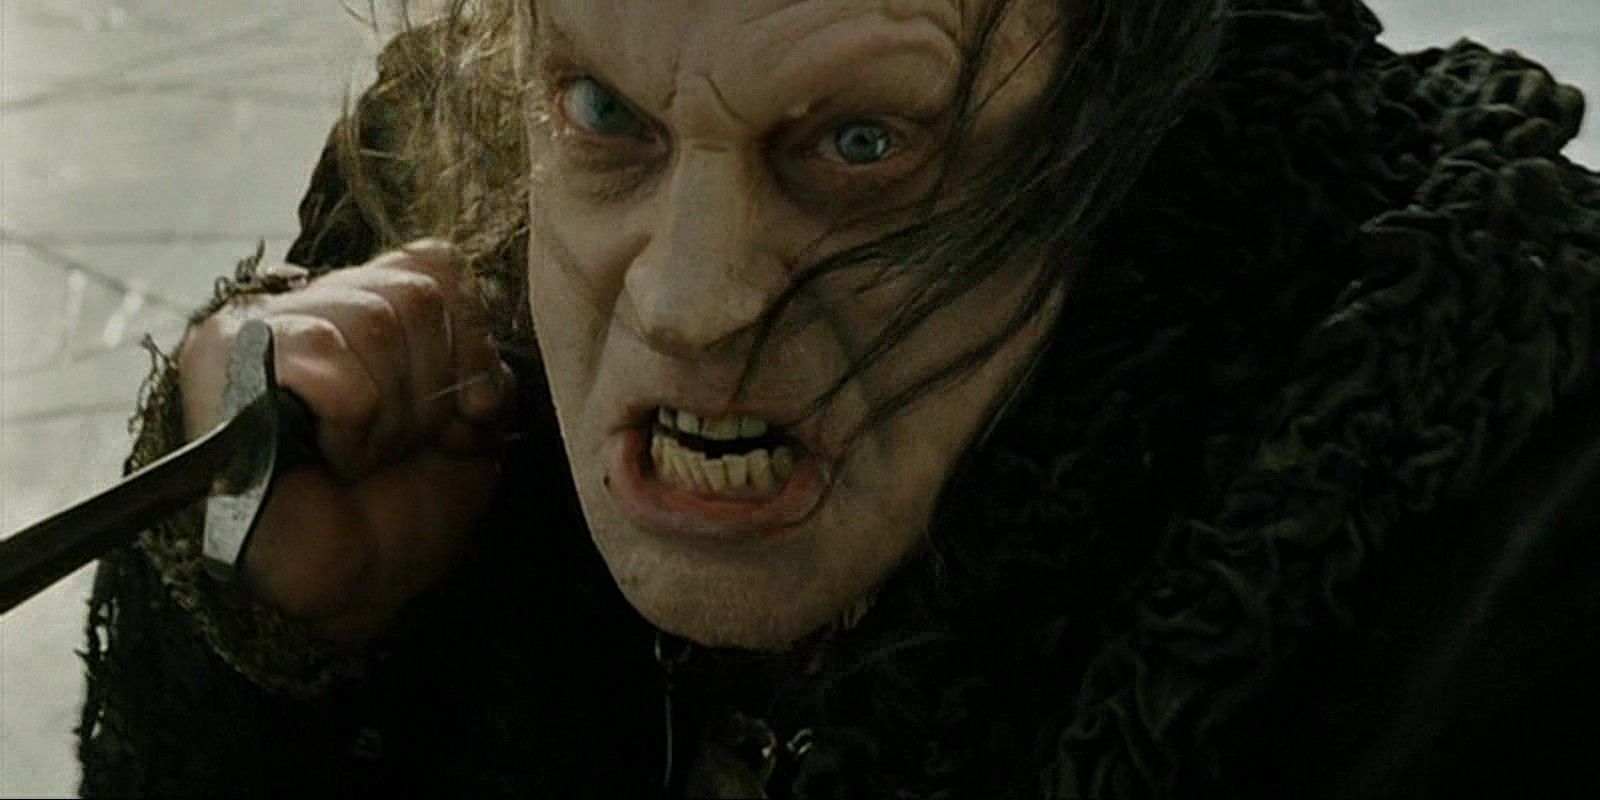 Brad Dourif as Grima Worntongue in The Lord of the Rings Return of the King